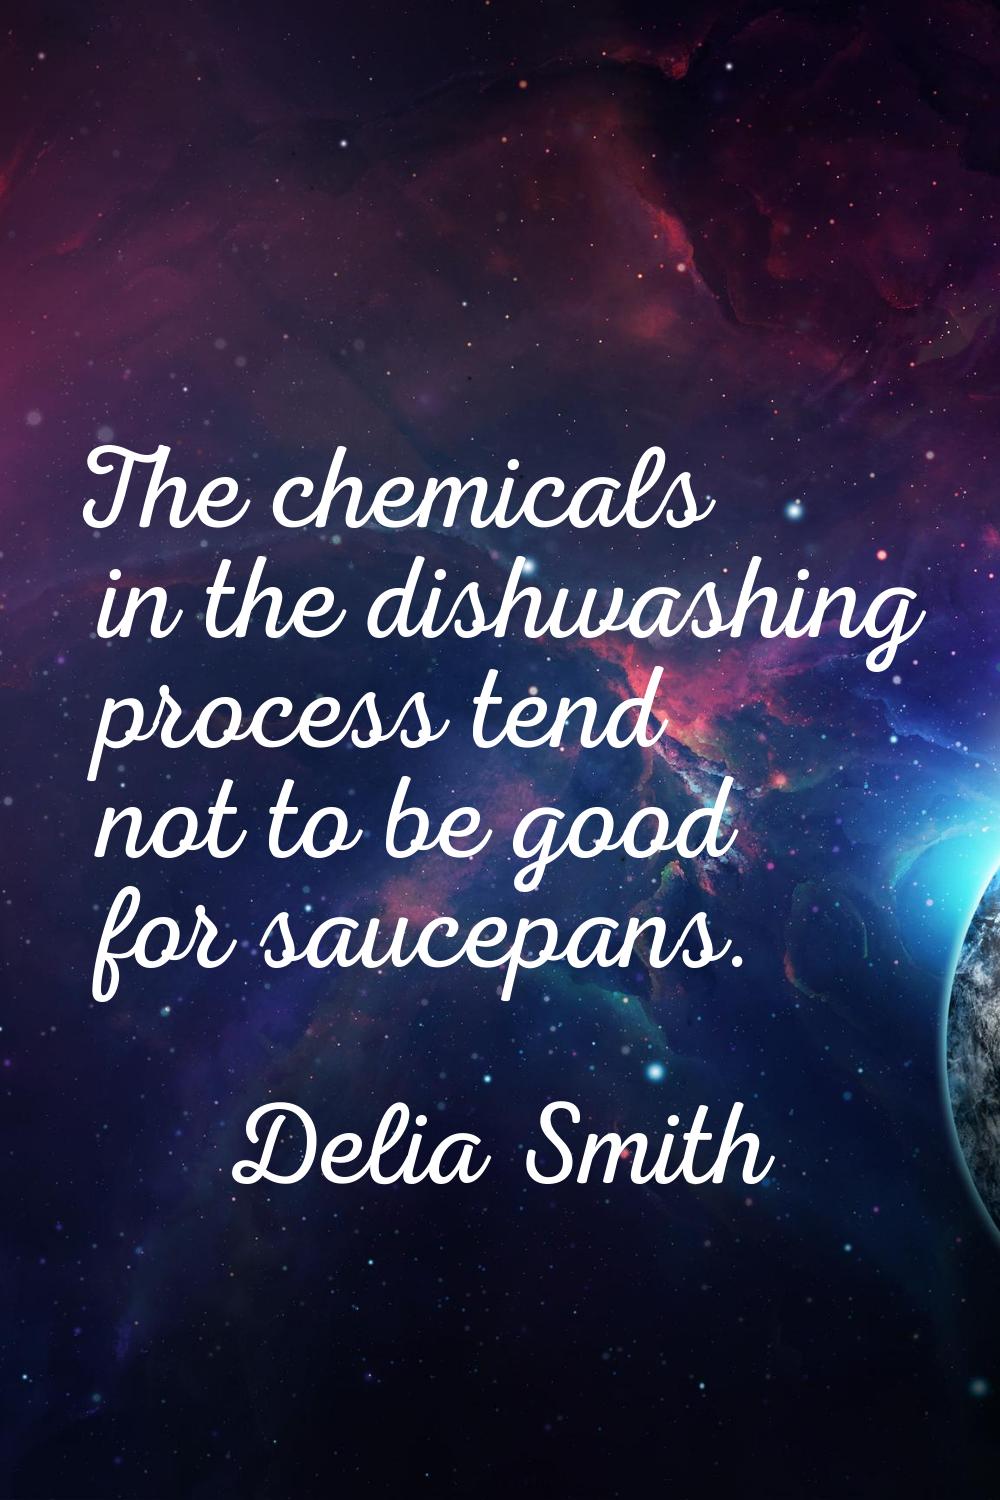 The chemicals in the dishwashing process tend not to be good for saucepans.